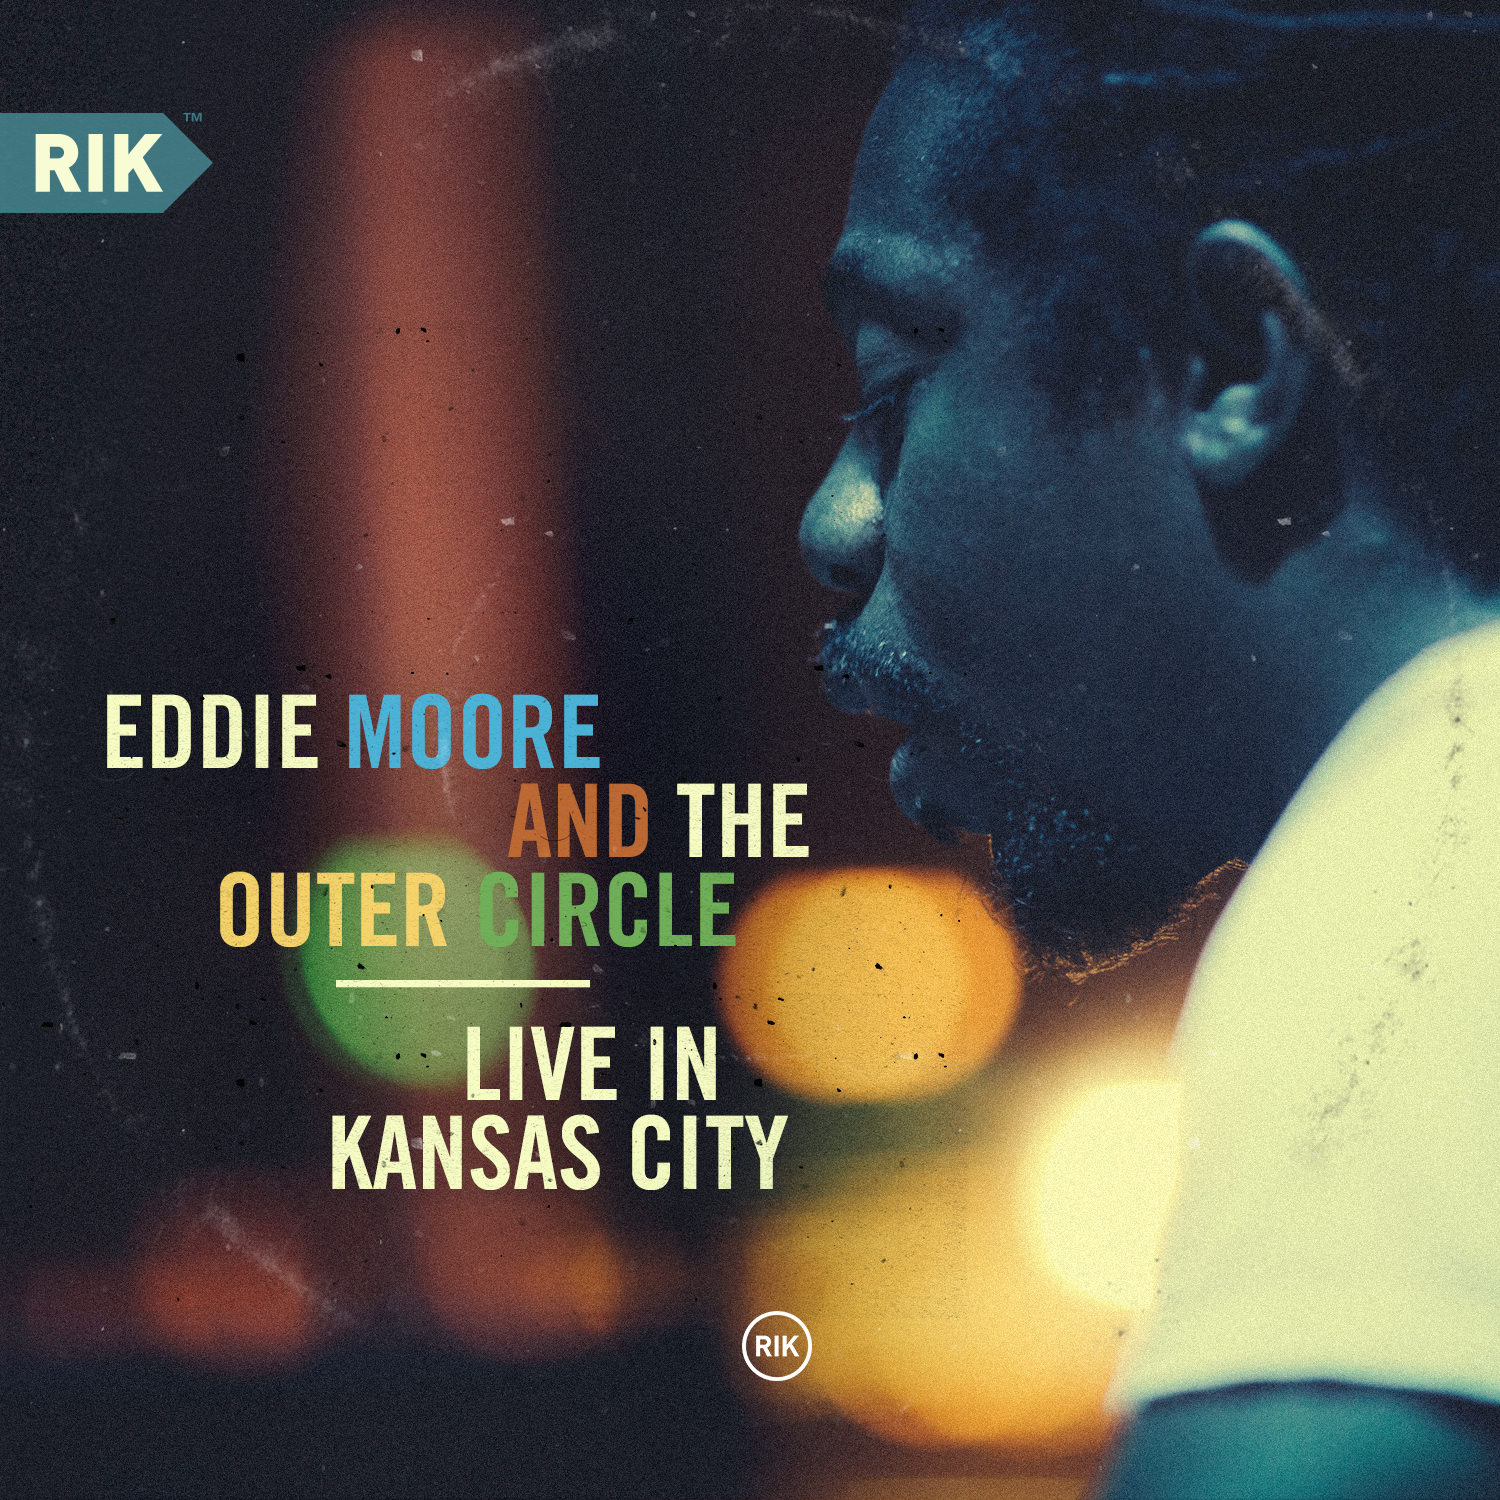 Eddie Moore and the Outer Circle — Live in Kansas City